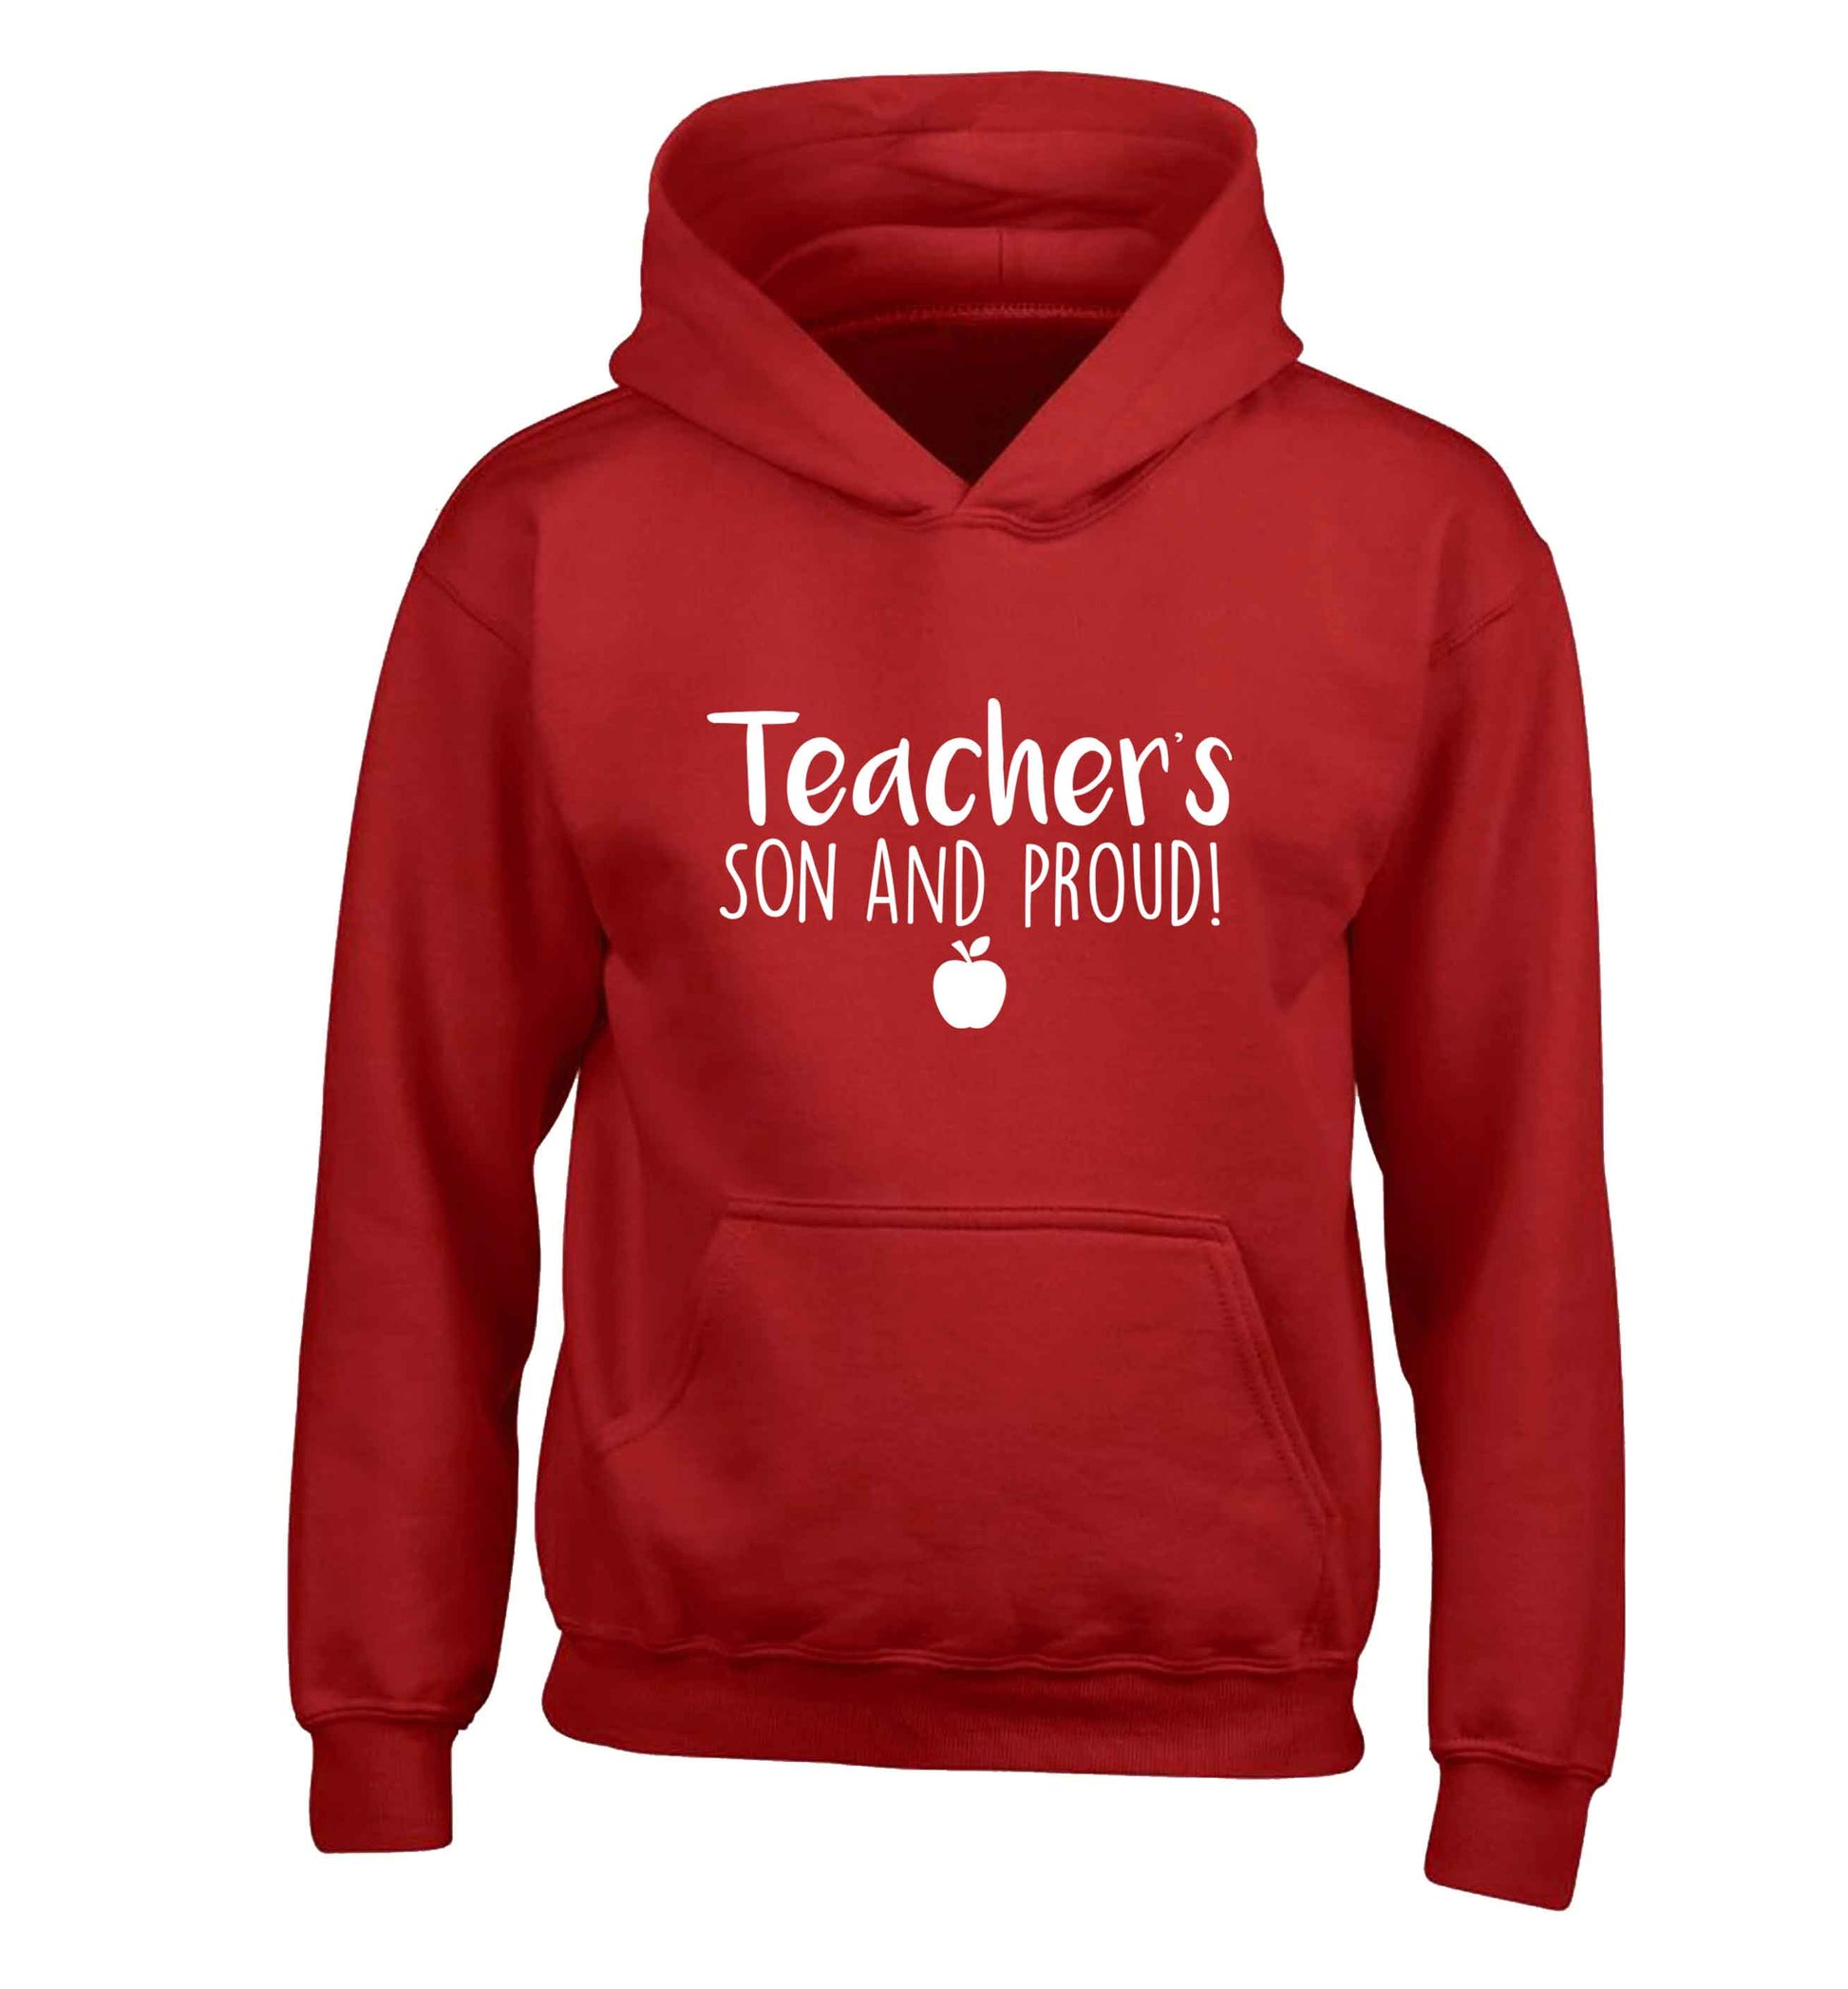 Teachers son and proud children's red hoodie 12-13 Years